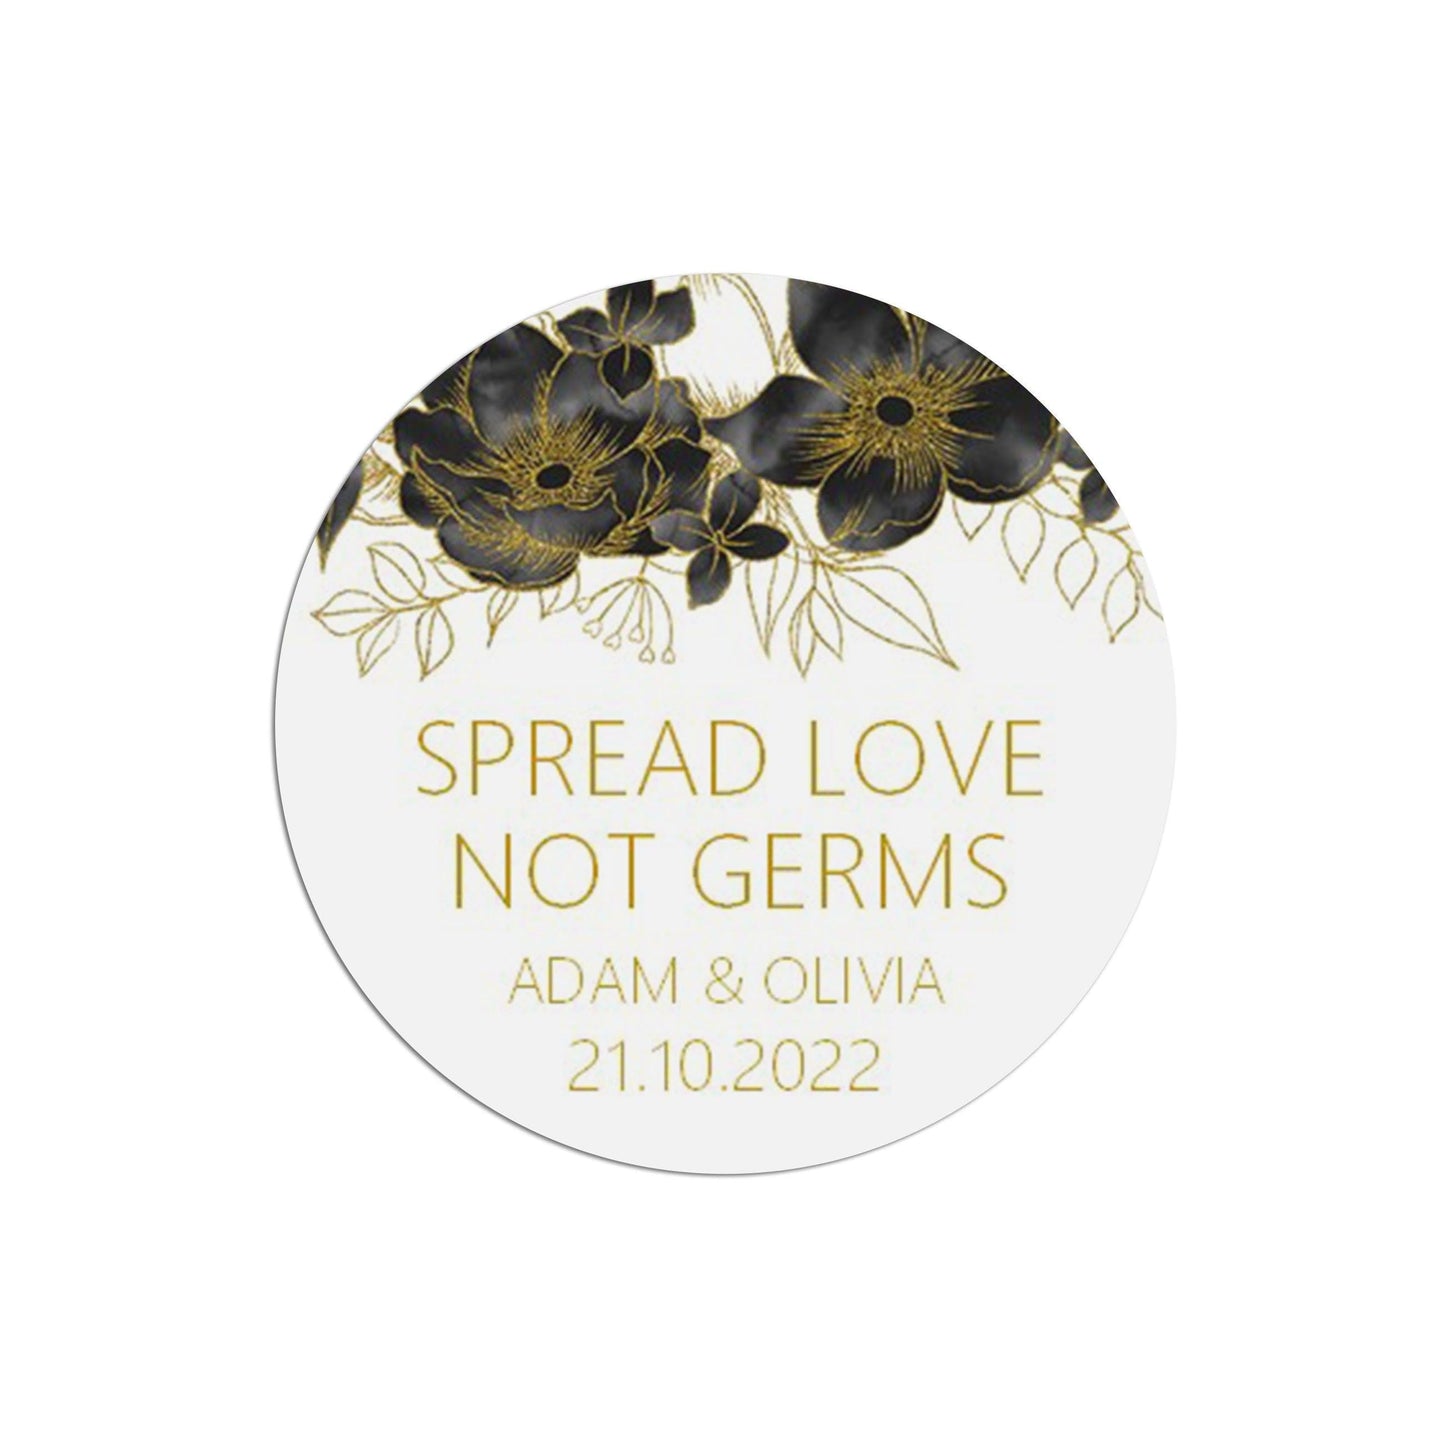  Spread Love Not Germs Black & Gold Stickers 37mm Round x 35 Personalised Stickers Per Sheet by PMPRINTED 